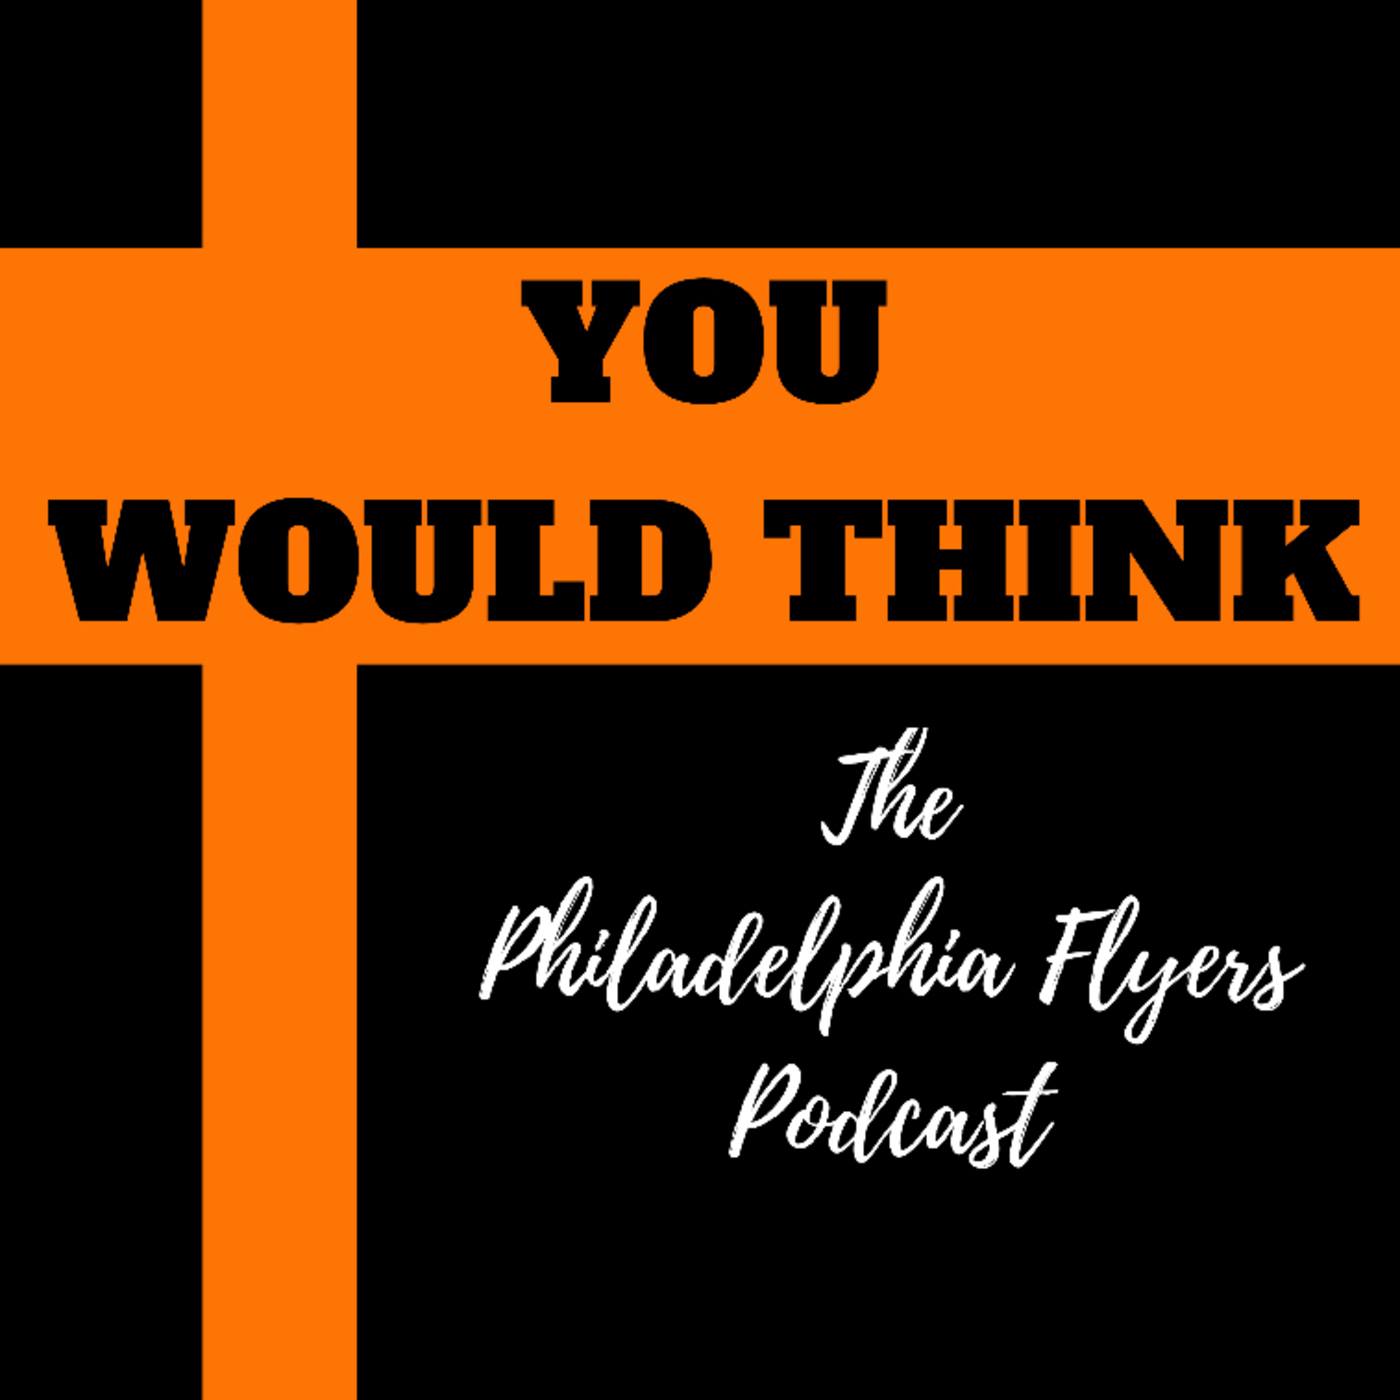 YWT: The Philadelphia Flyers Podcast – YWT #203 – Becoming The Villain